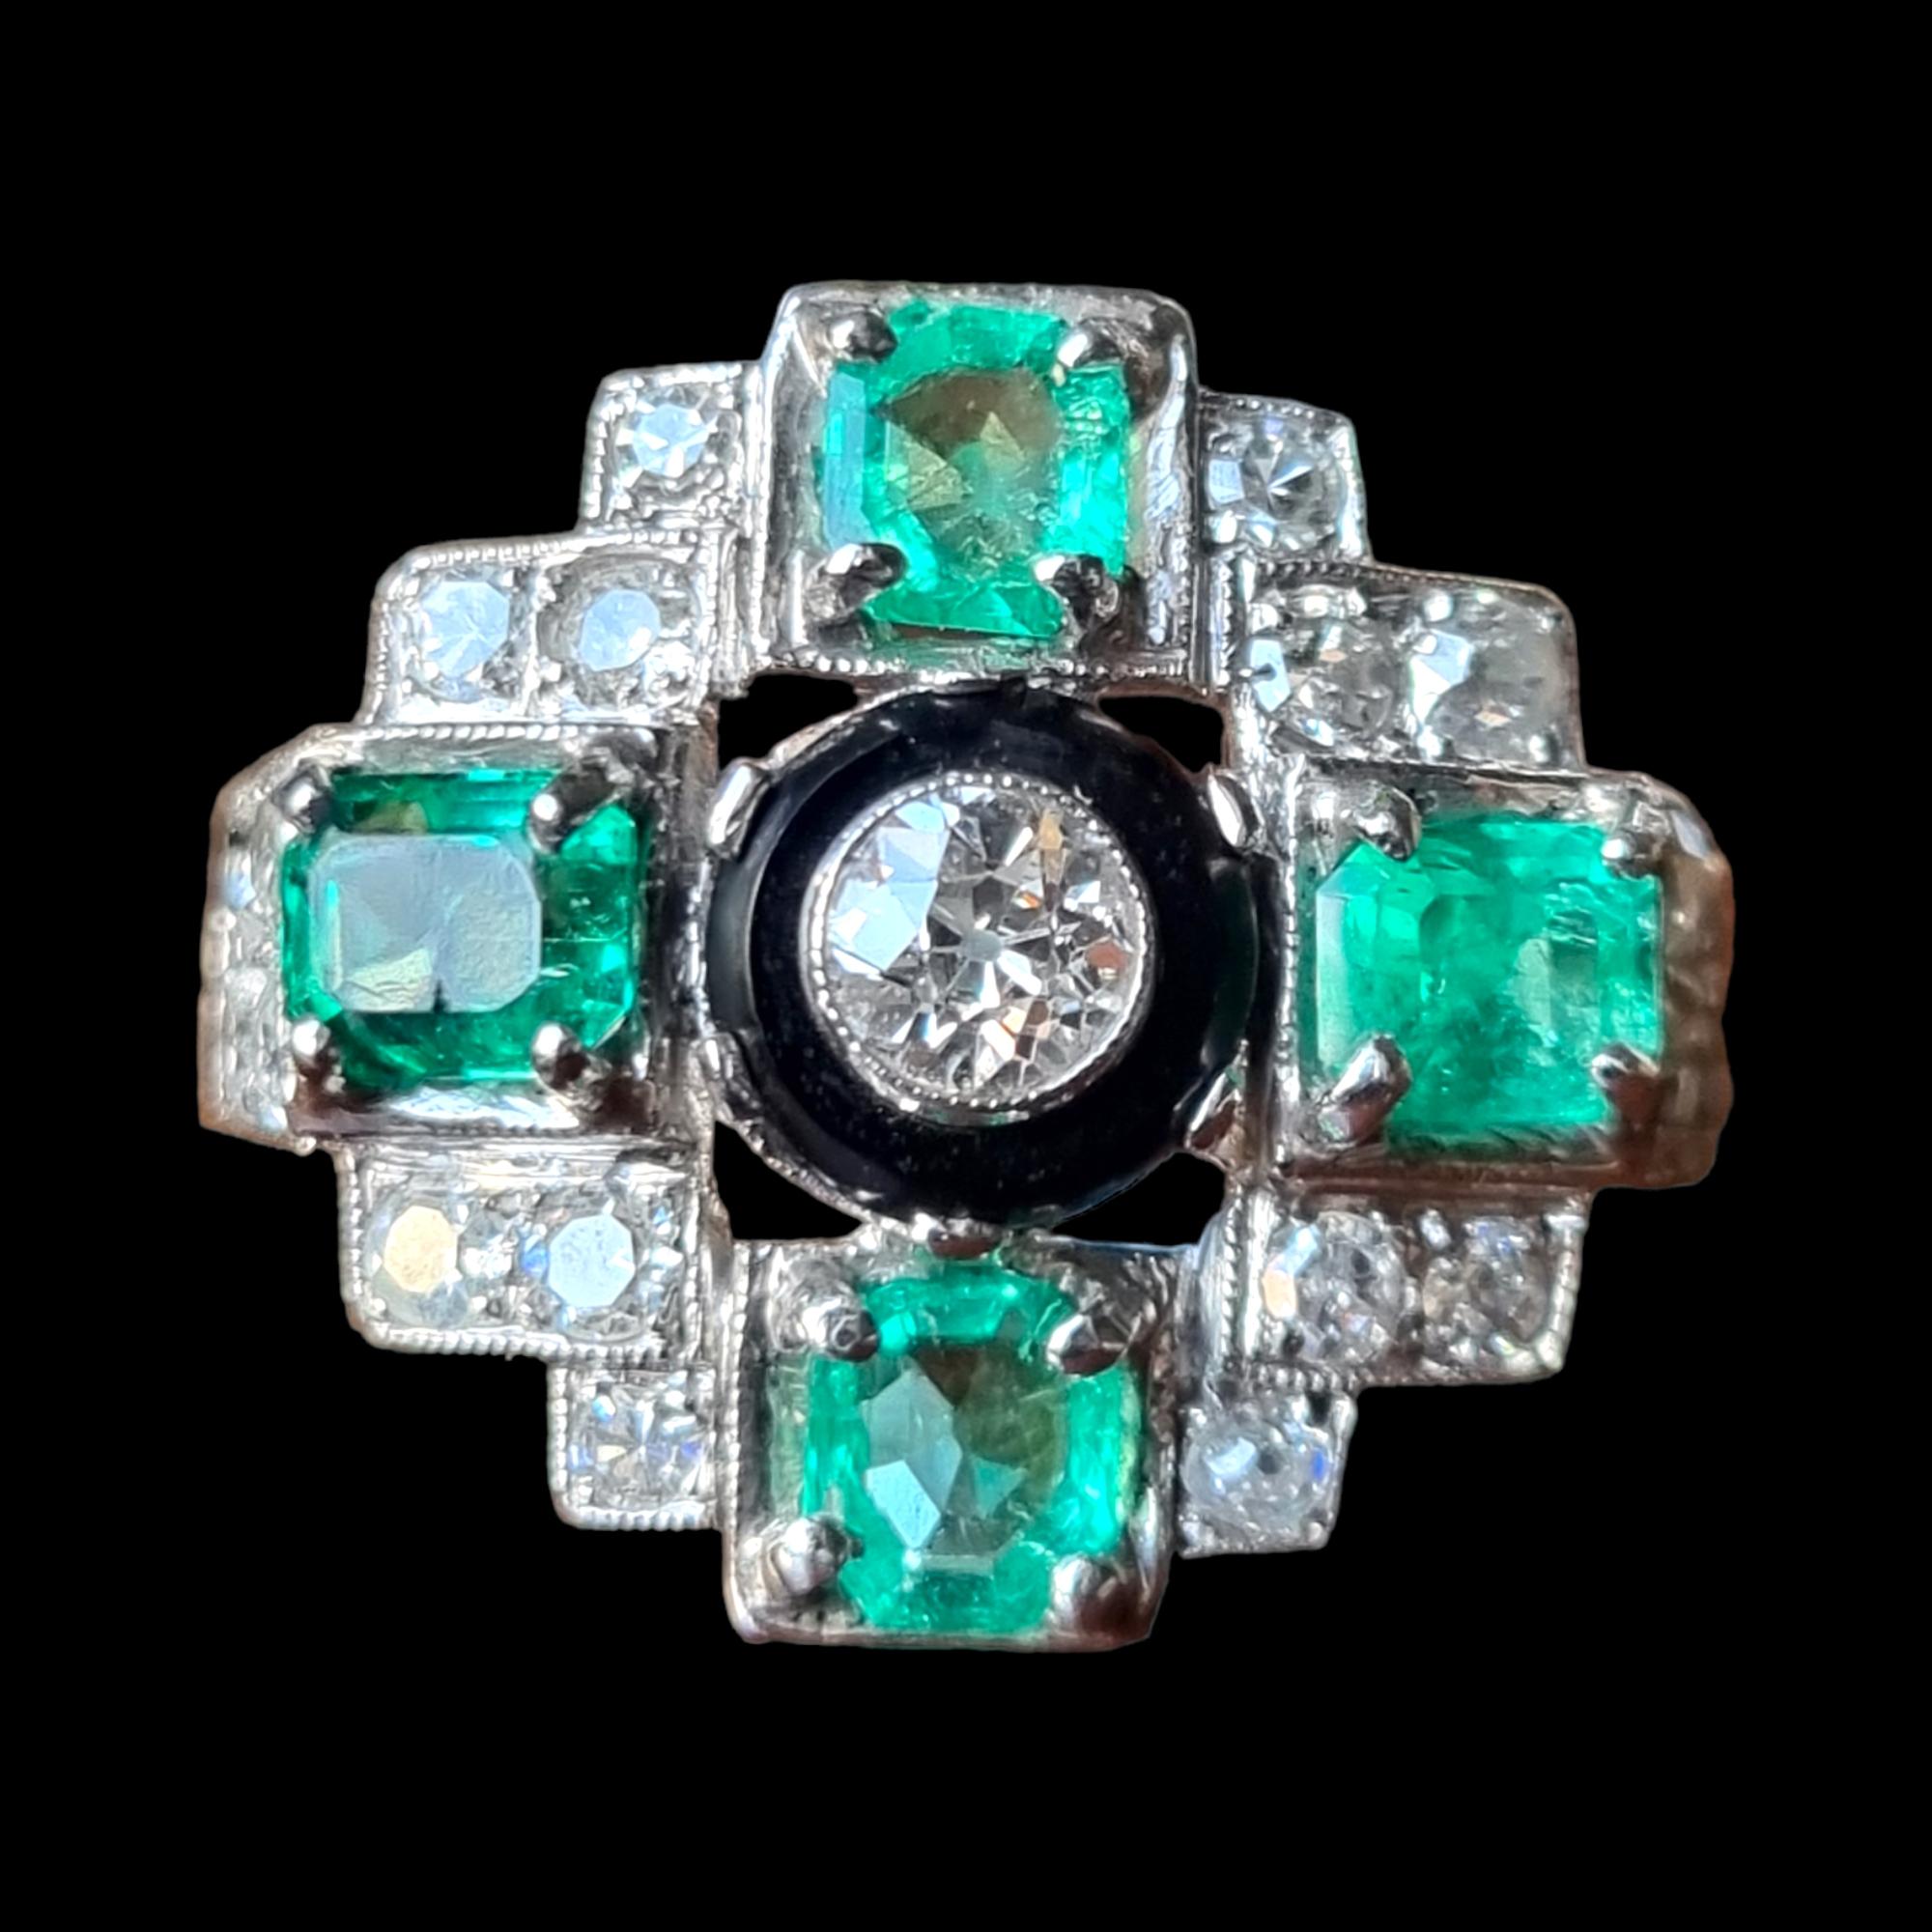 Women's Art-Deco Style Cross Shaped Design Emerald, Diamond and Onyx Cocktail Ring For Sale